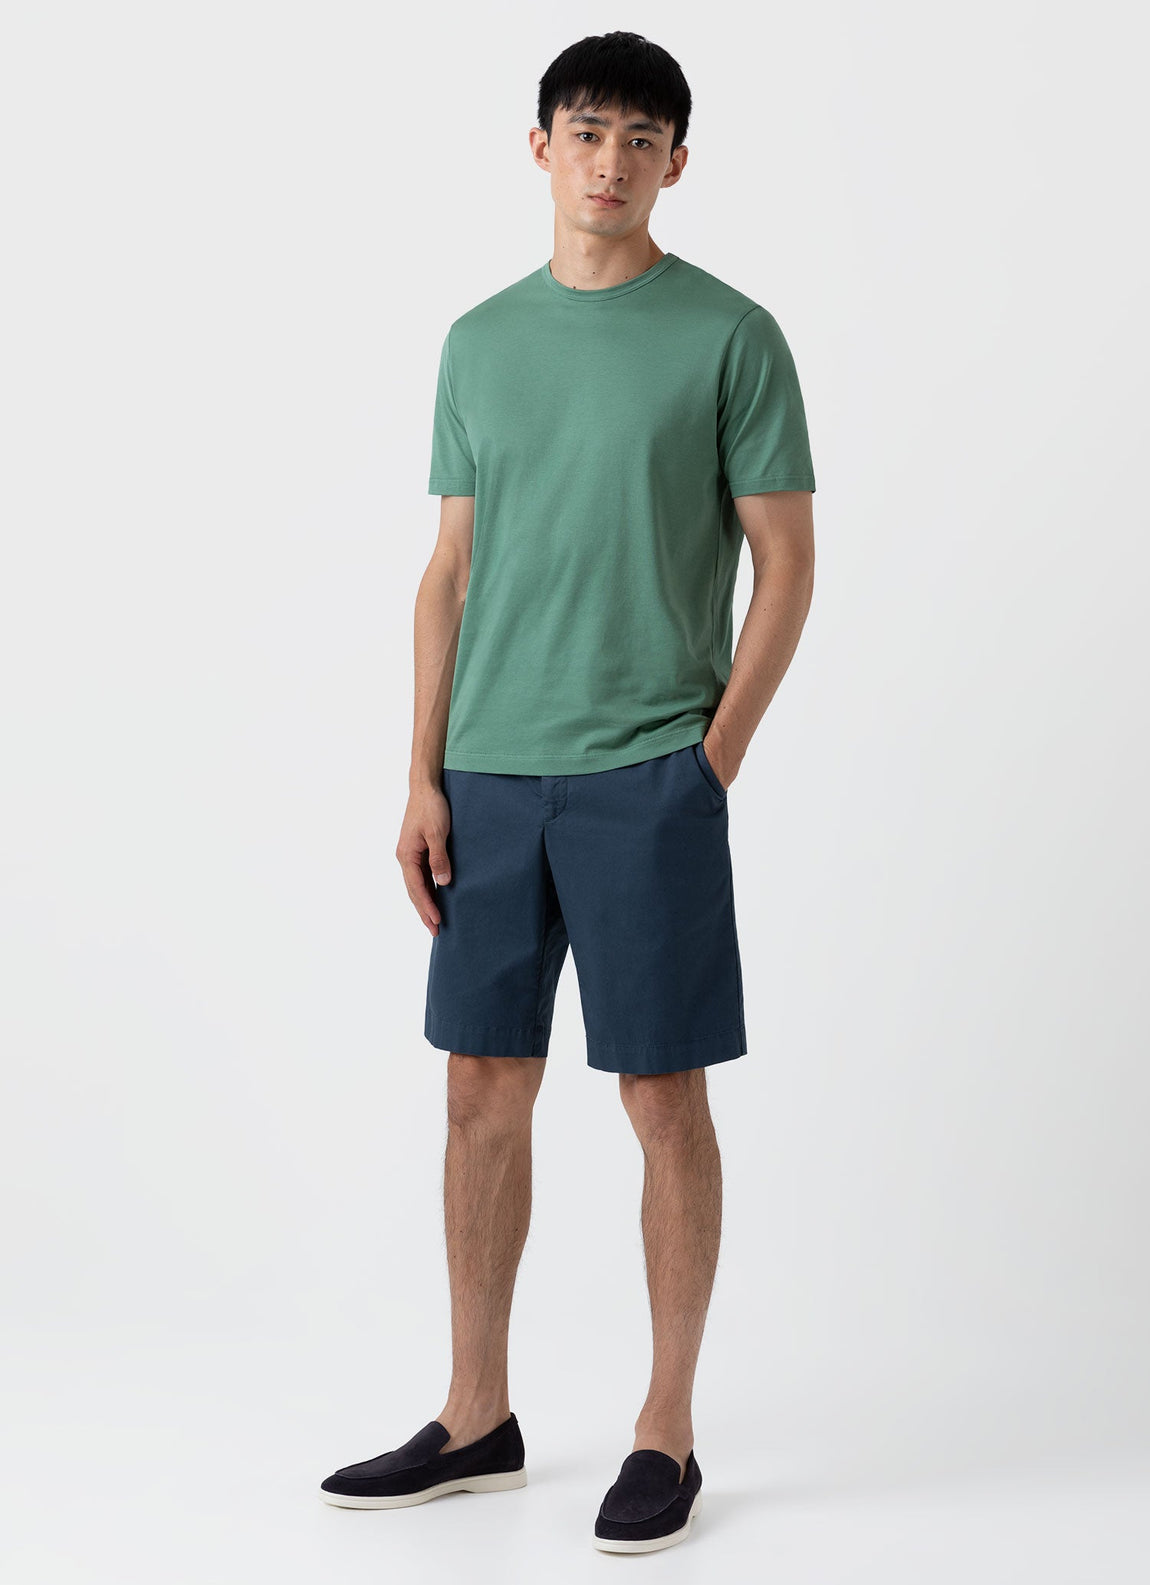 Men's Classic T-shirt in Thyme